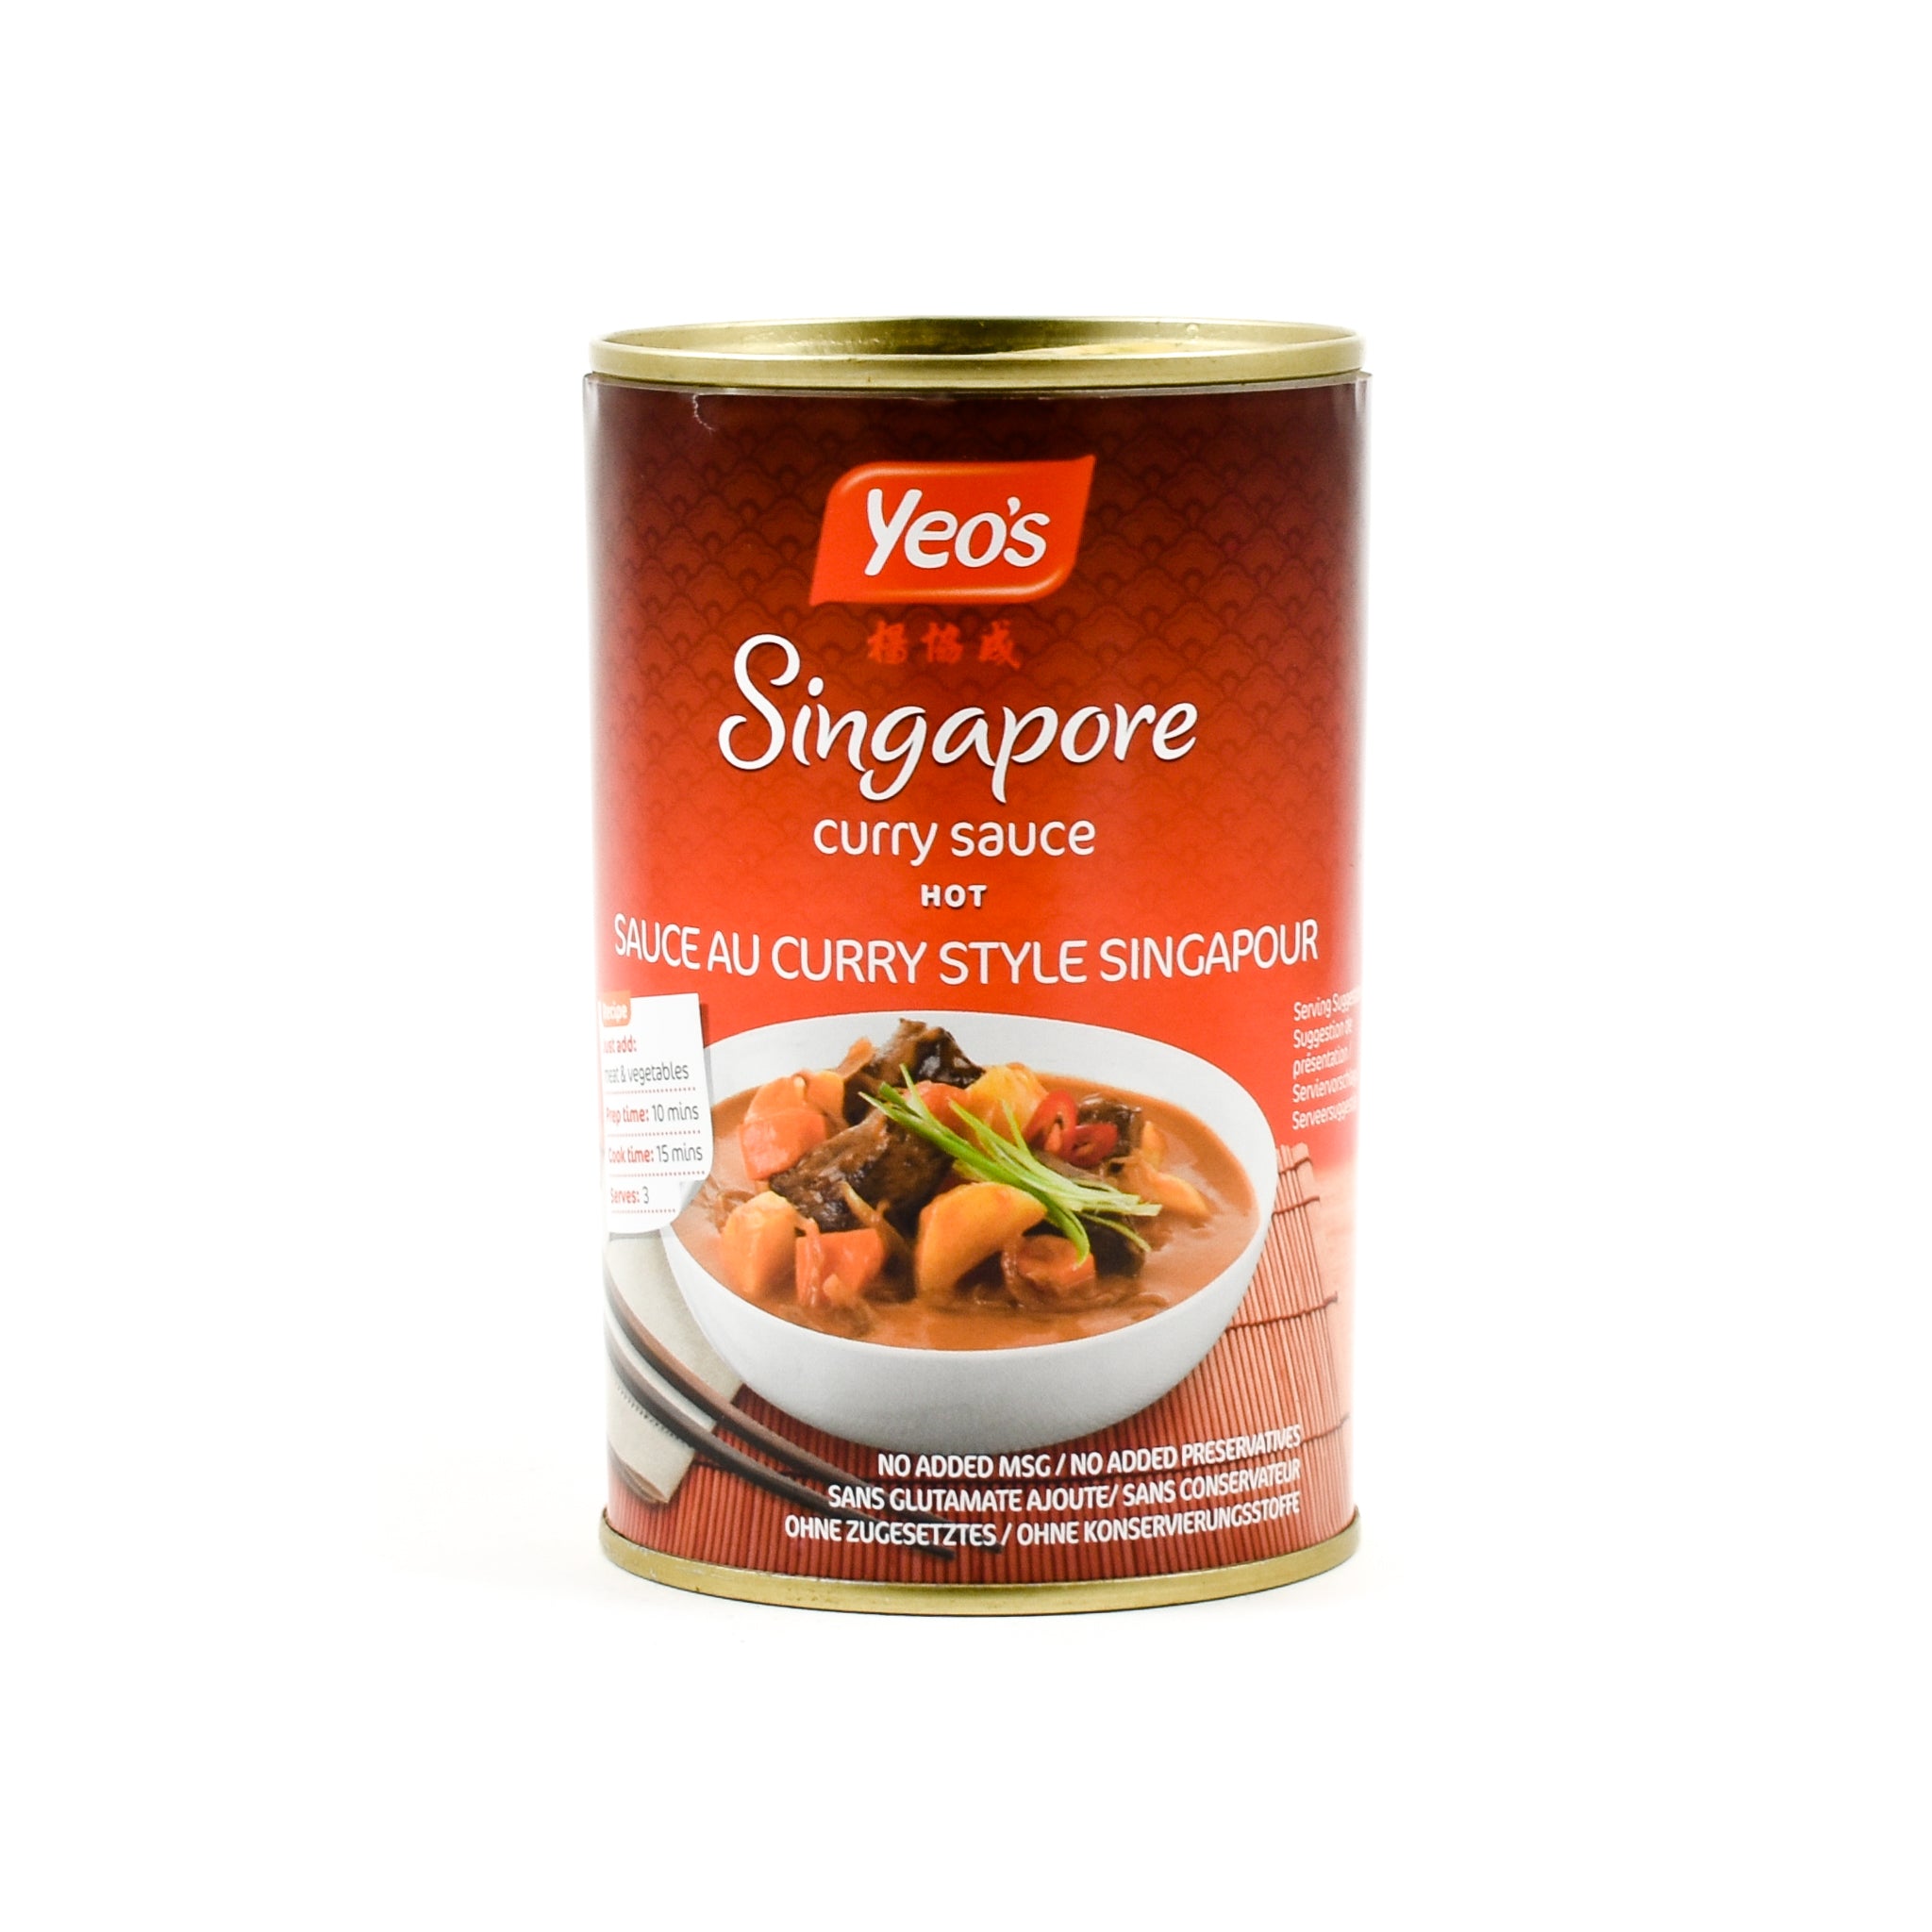 Yeo's Singapore Hot Curry Sauce 400ml Ingredients Sauces & Condiments Asian Sauces & Condiments Southeast Asian Food